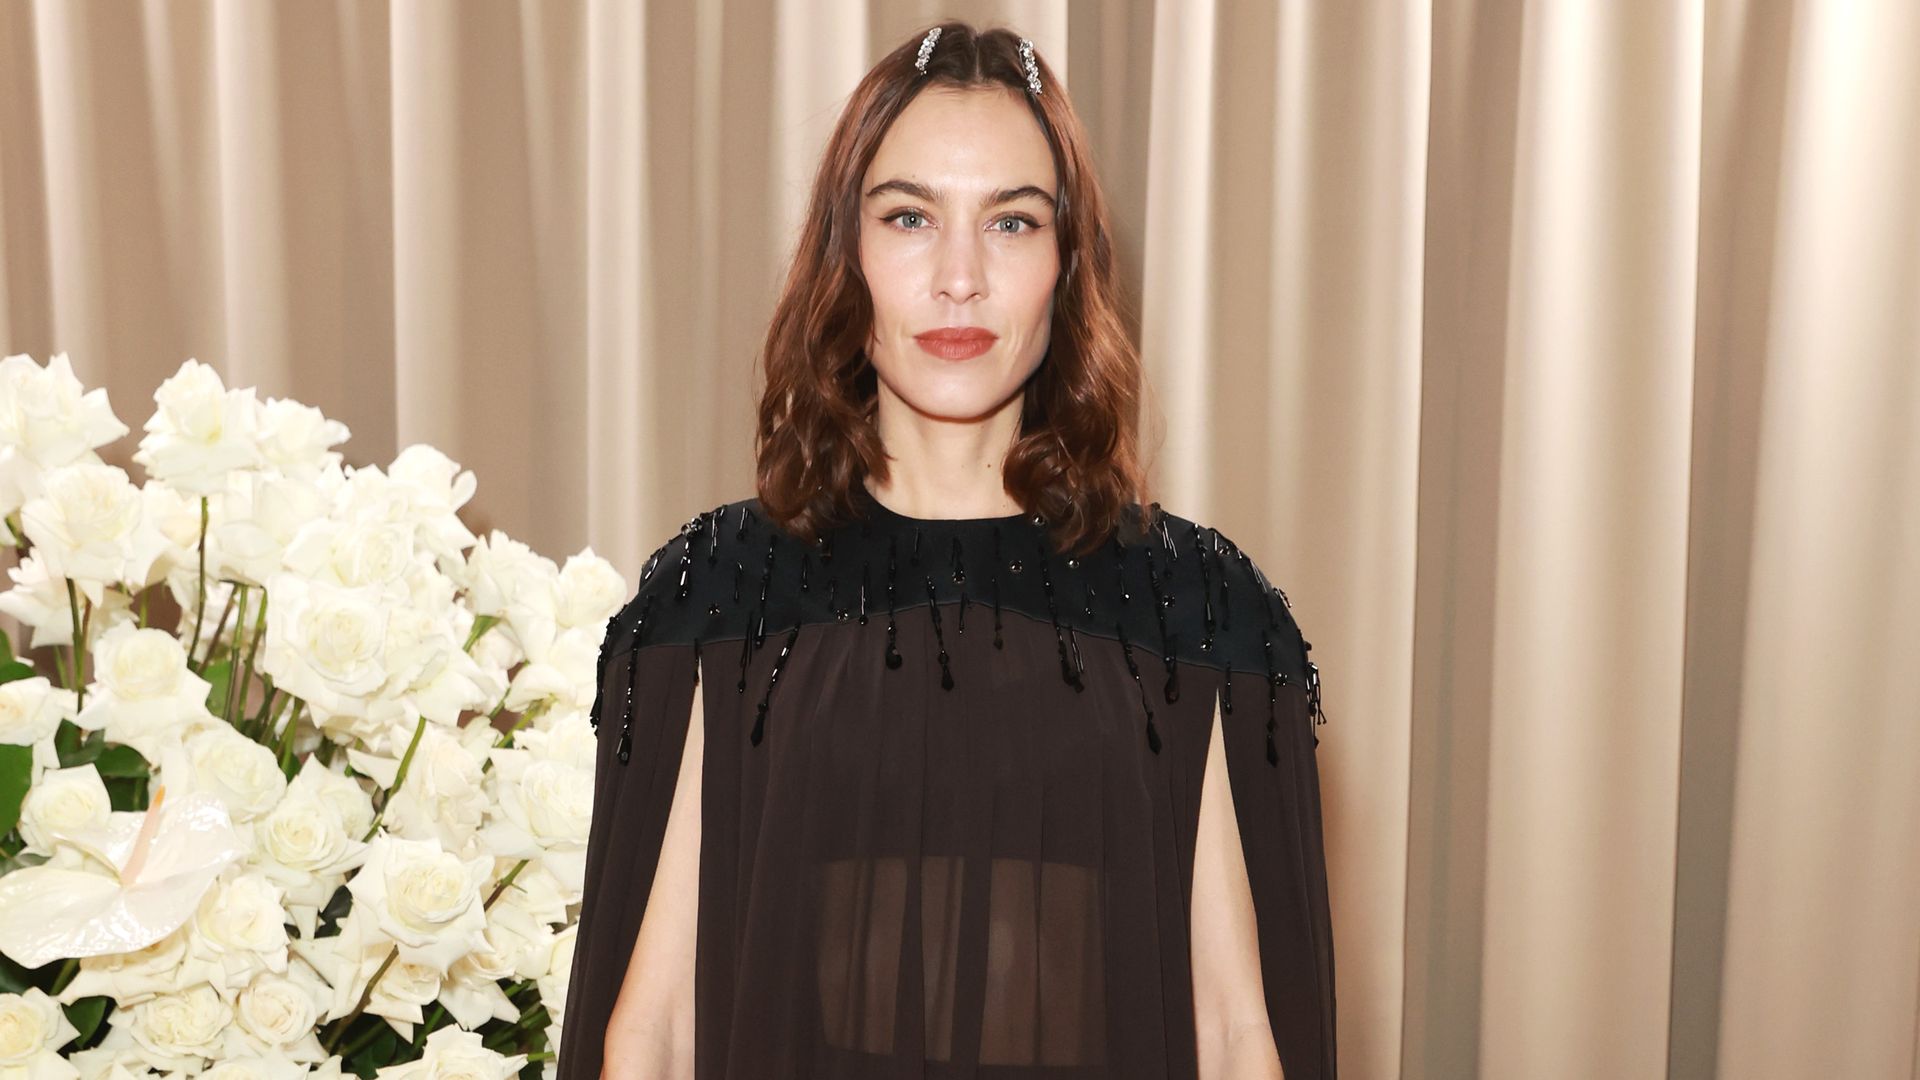 LONDON, ENGLAND - DECEMBER 04: Alexa Chung attends the British Vogue 'Forces For Change' dinner hosted by Edward Enninful and Vanessa Kingori at The Londoner Hotel on December 4, 2022 in London, England. (Photo by David M. Benett/Hoda Davaine/Dave Benett/Getty Images)